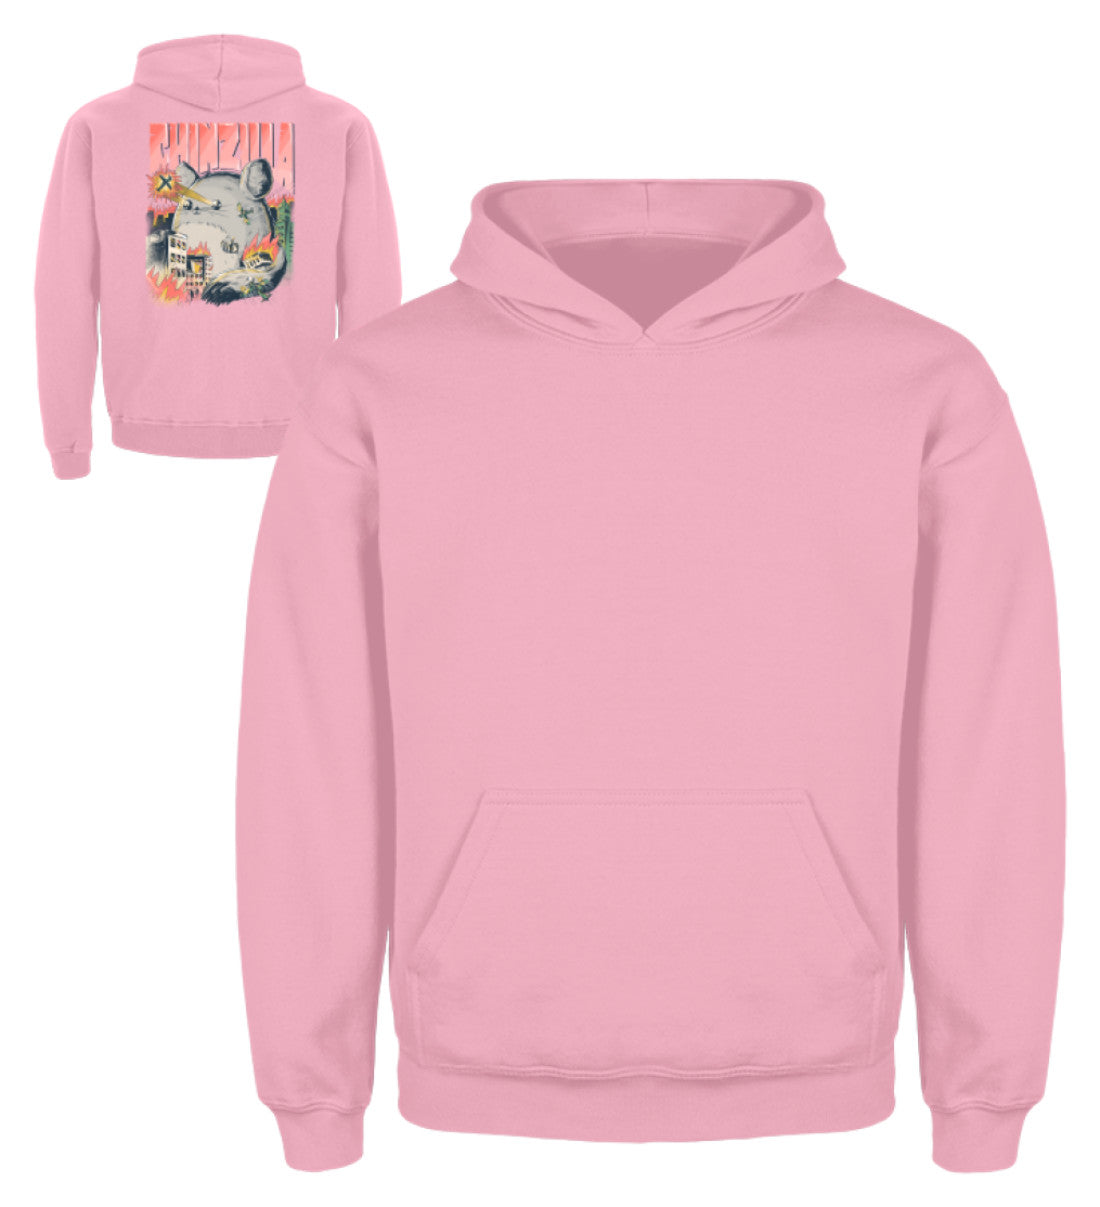 Zeigt chinzilla funny chinchilla owners gift kinder hoodie in Farbe Sky Blue